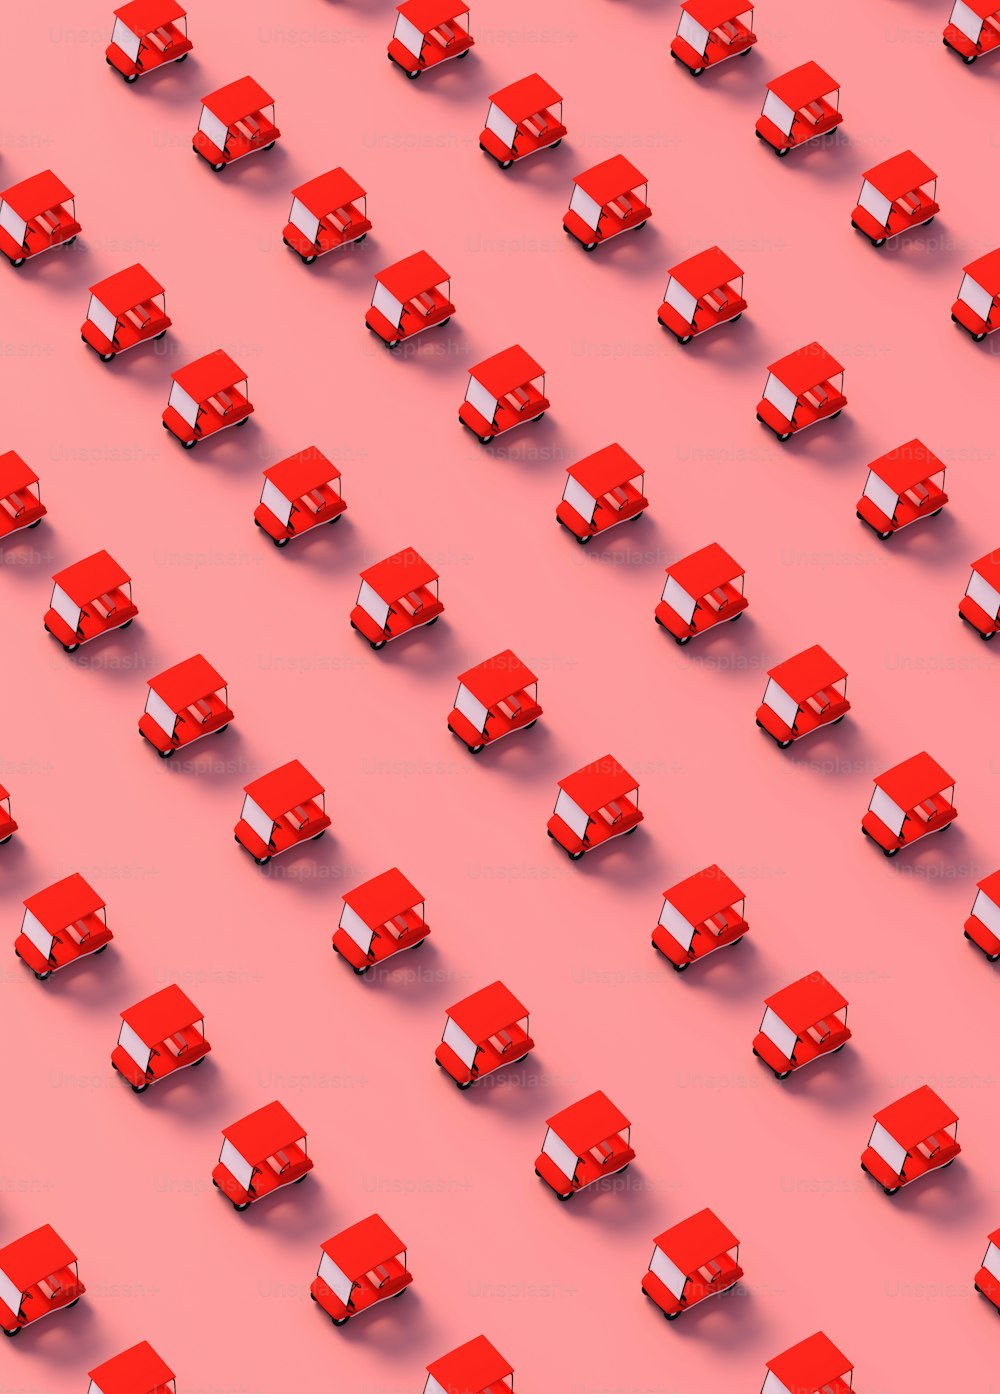 a large group of red cubes on a pink background